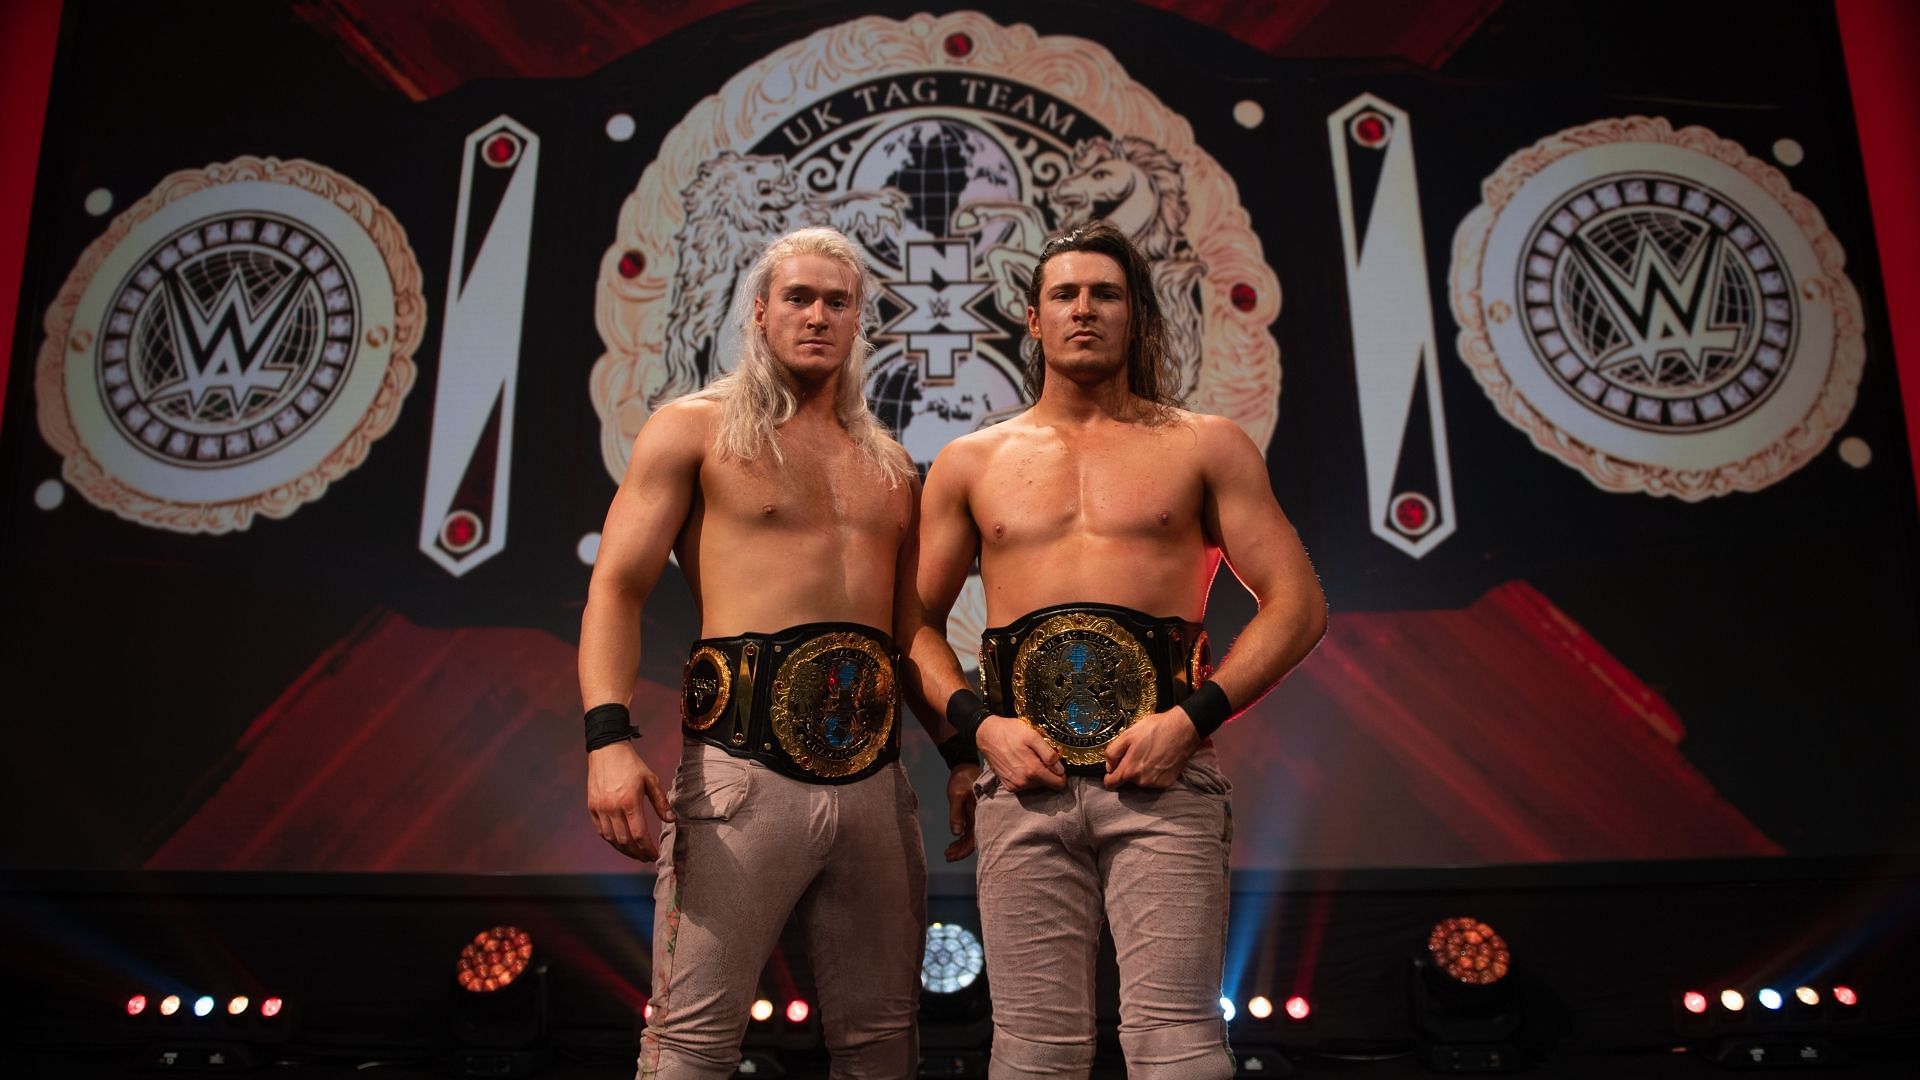 Pretty deadly are now 2x NXT Tag Team Champions